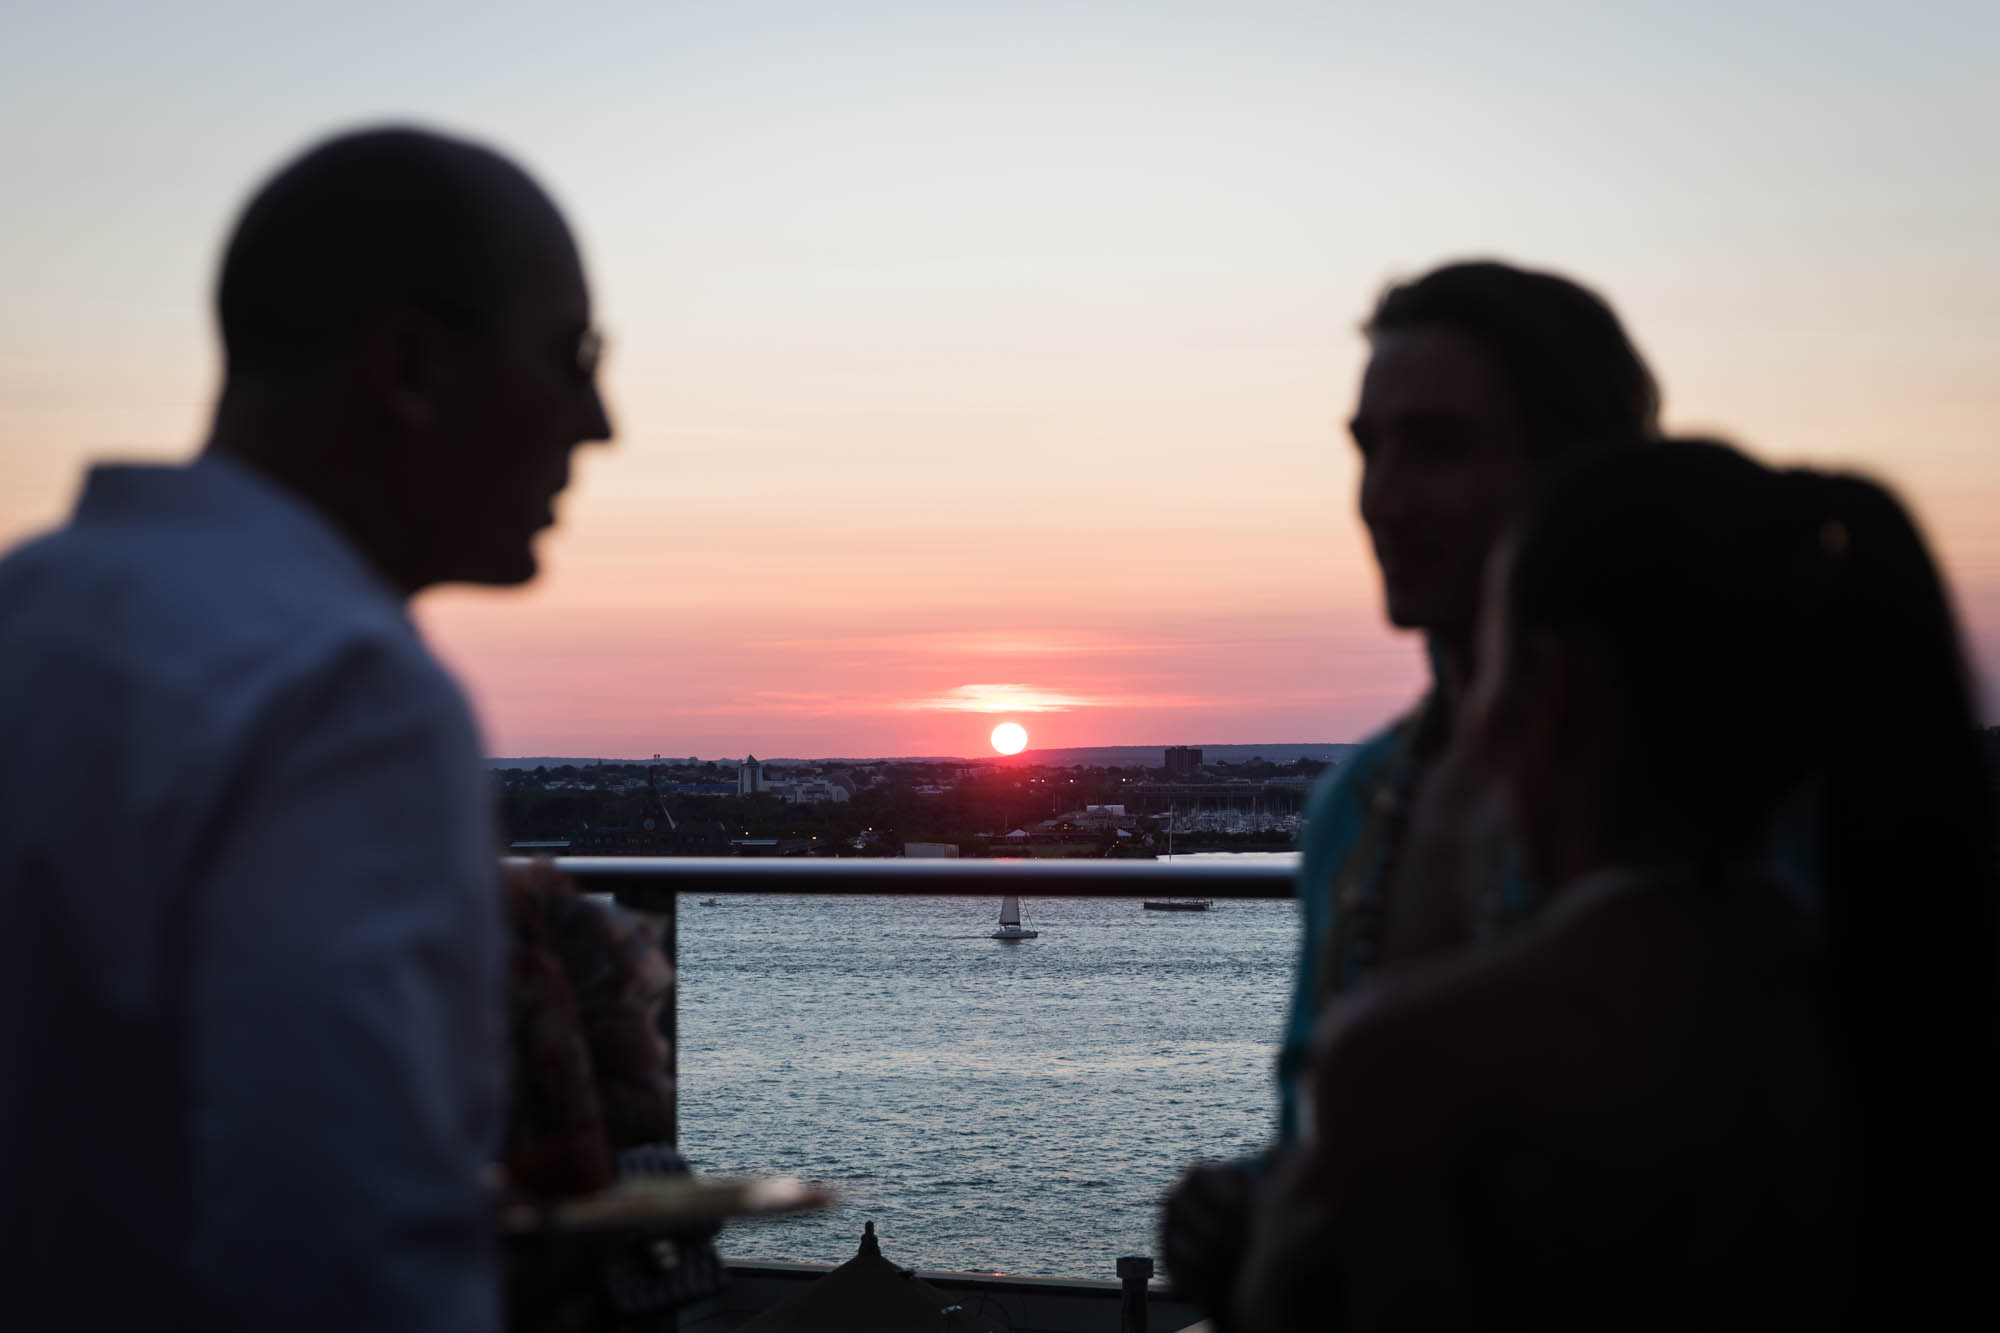 Sunset over the Hudson River behind guests at an outdoor party